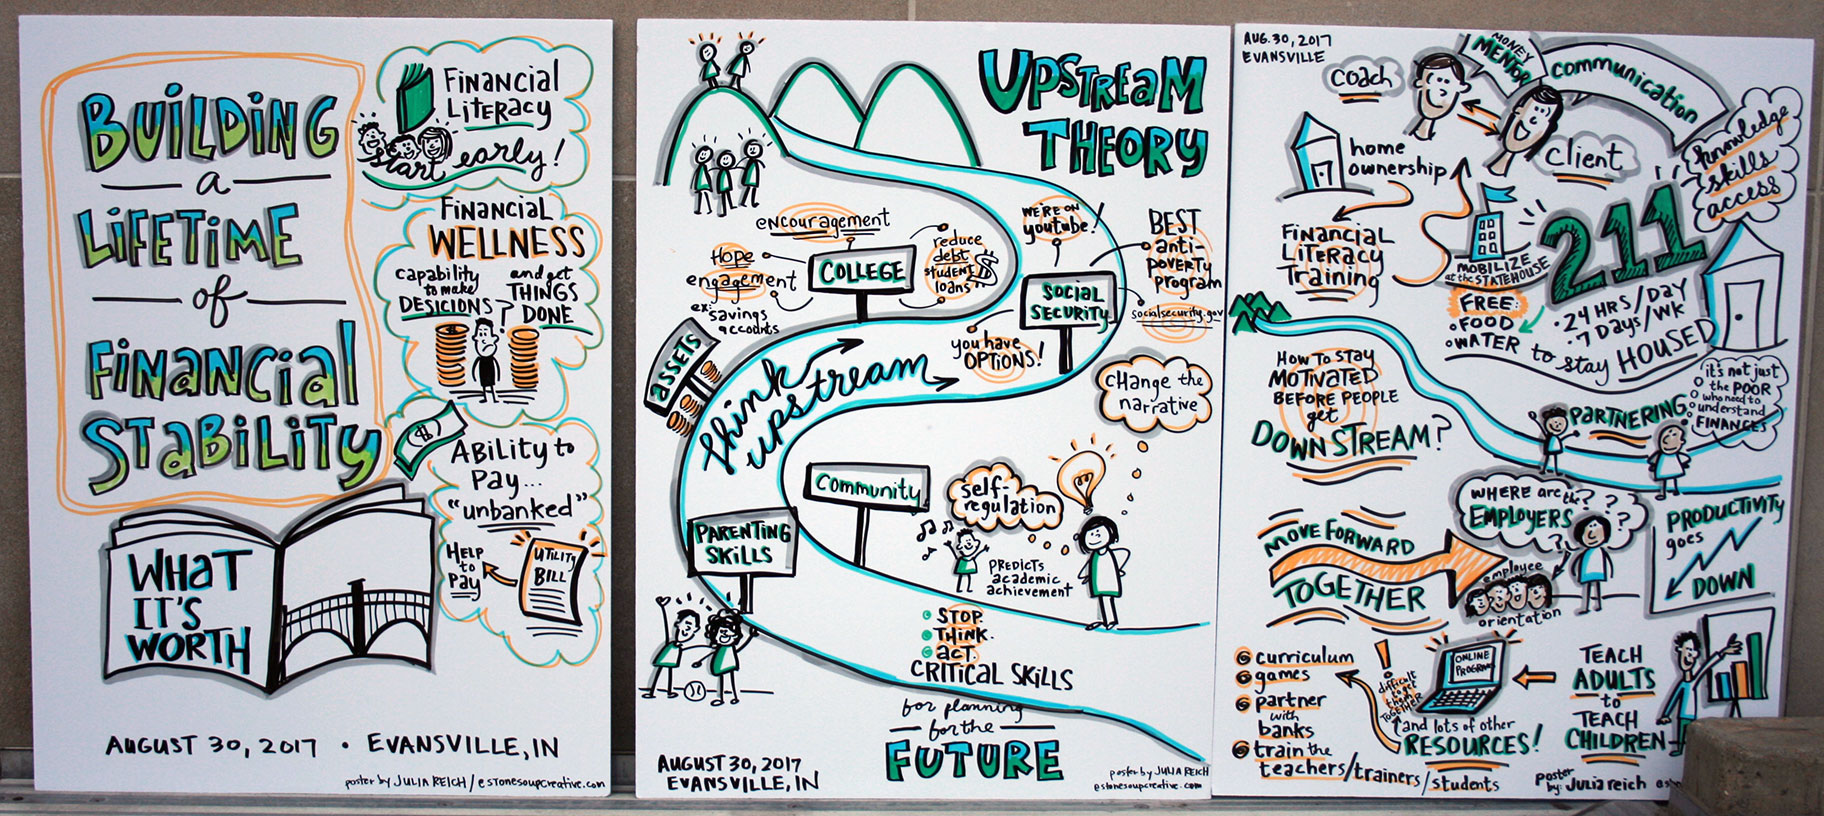 graphic recording building a lifetime of financial stability prosperity indiana